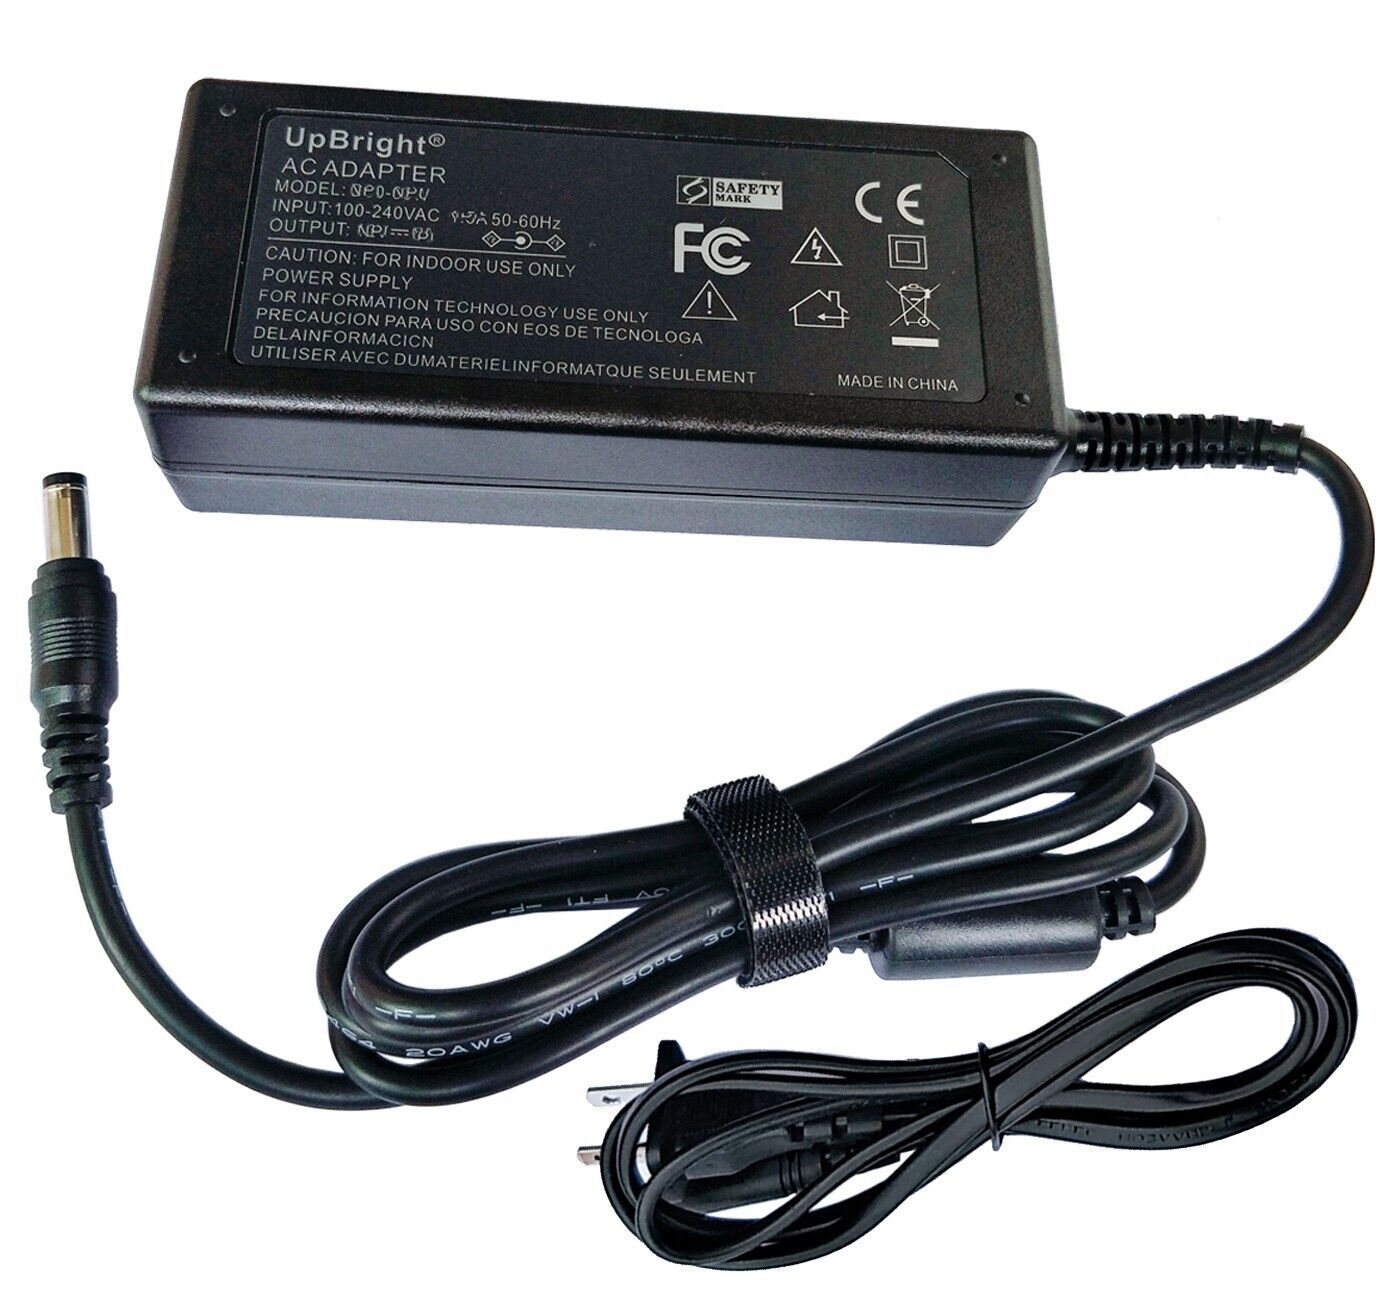 Primary image for Ac Adapter For Nood Kca423 The Flasher 2 Ipl Laser Hair Removal Tap40-120S300U1